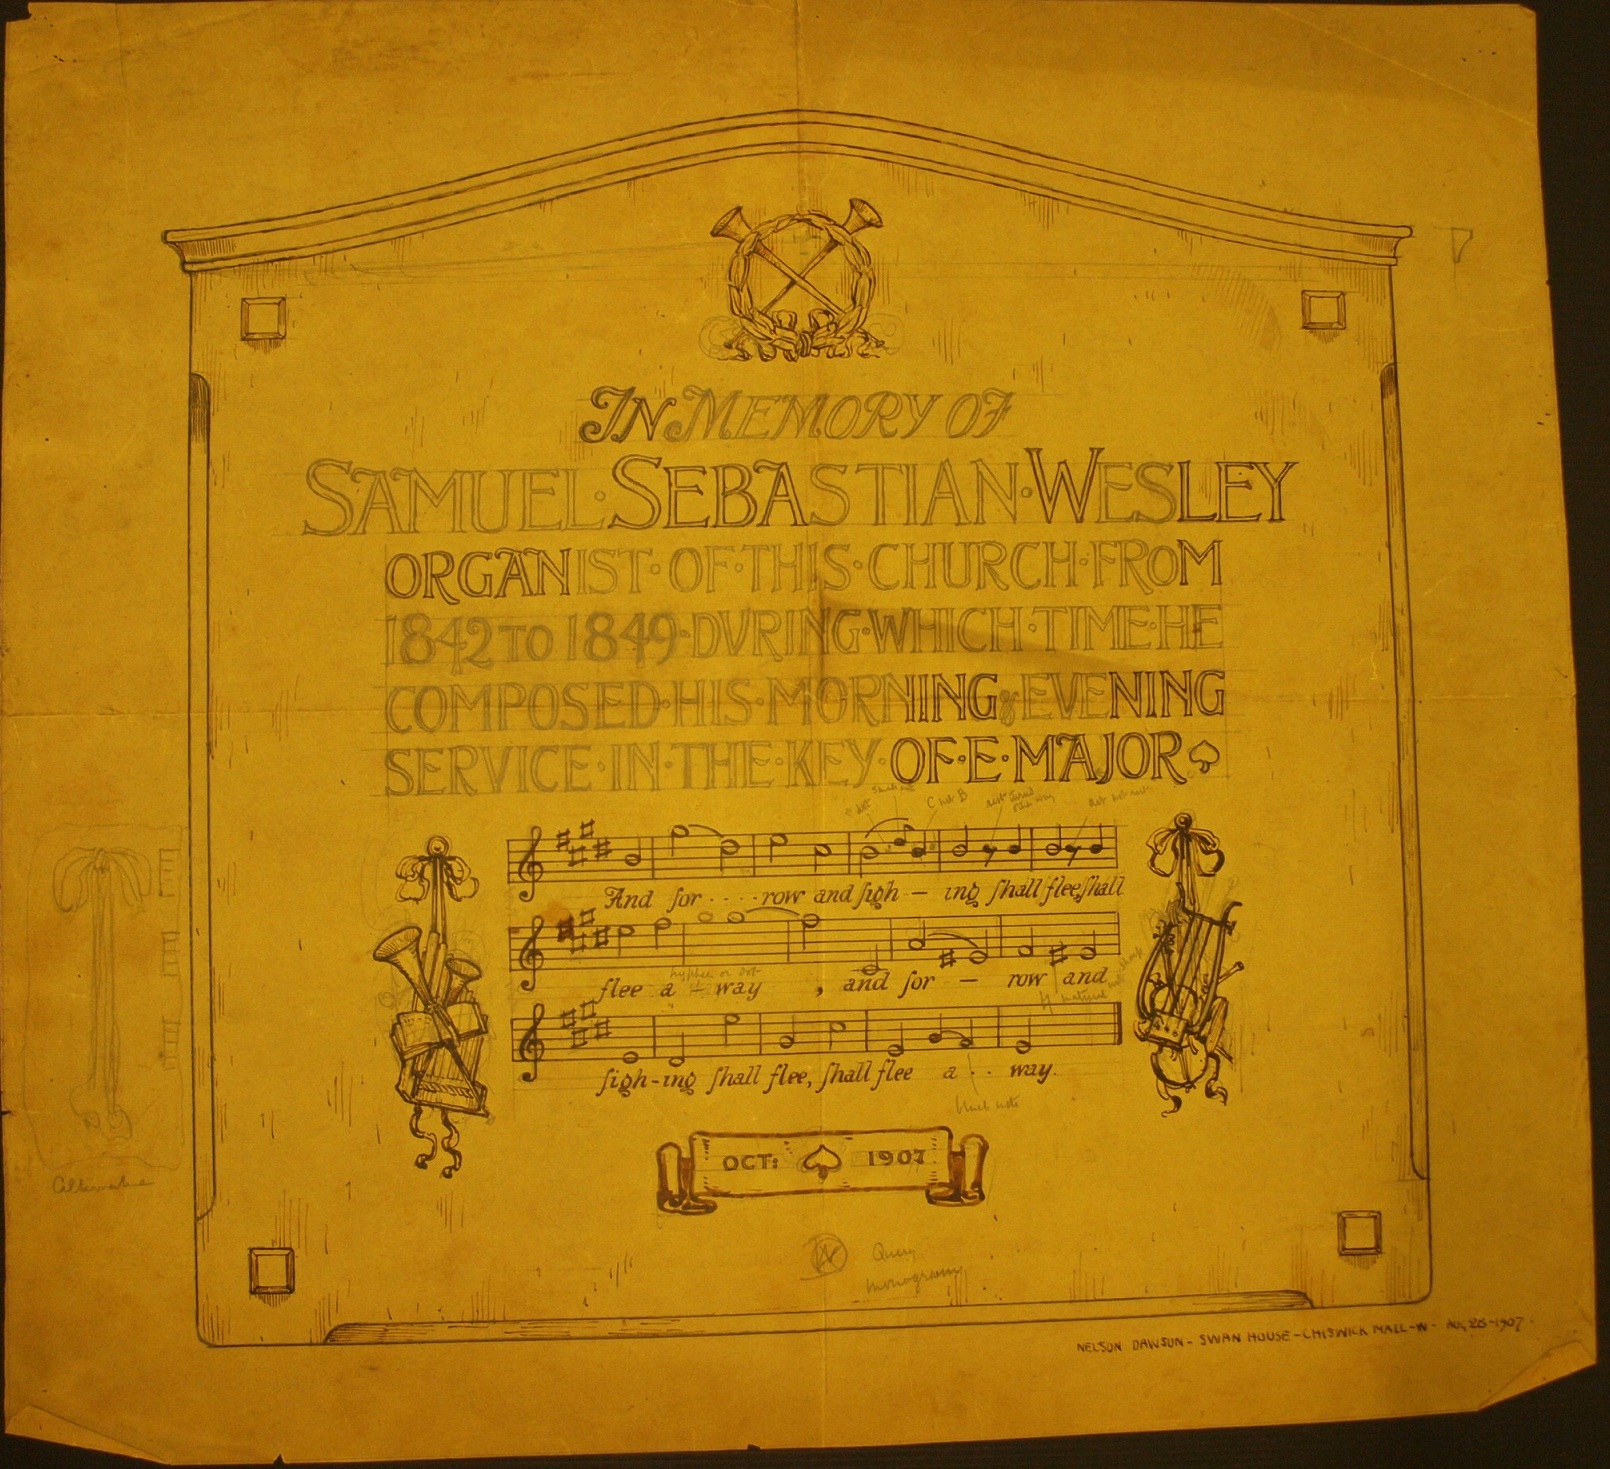 Design for a memorial tablet to Samuel Sebastian Wesley (1810-1876) for Leeds Parish Church, by Nelson Dawson. Museum number E.718-1976 ©Victoria and Albert Museum, London